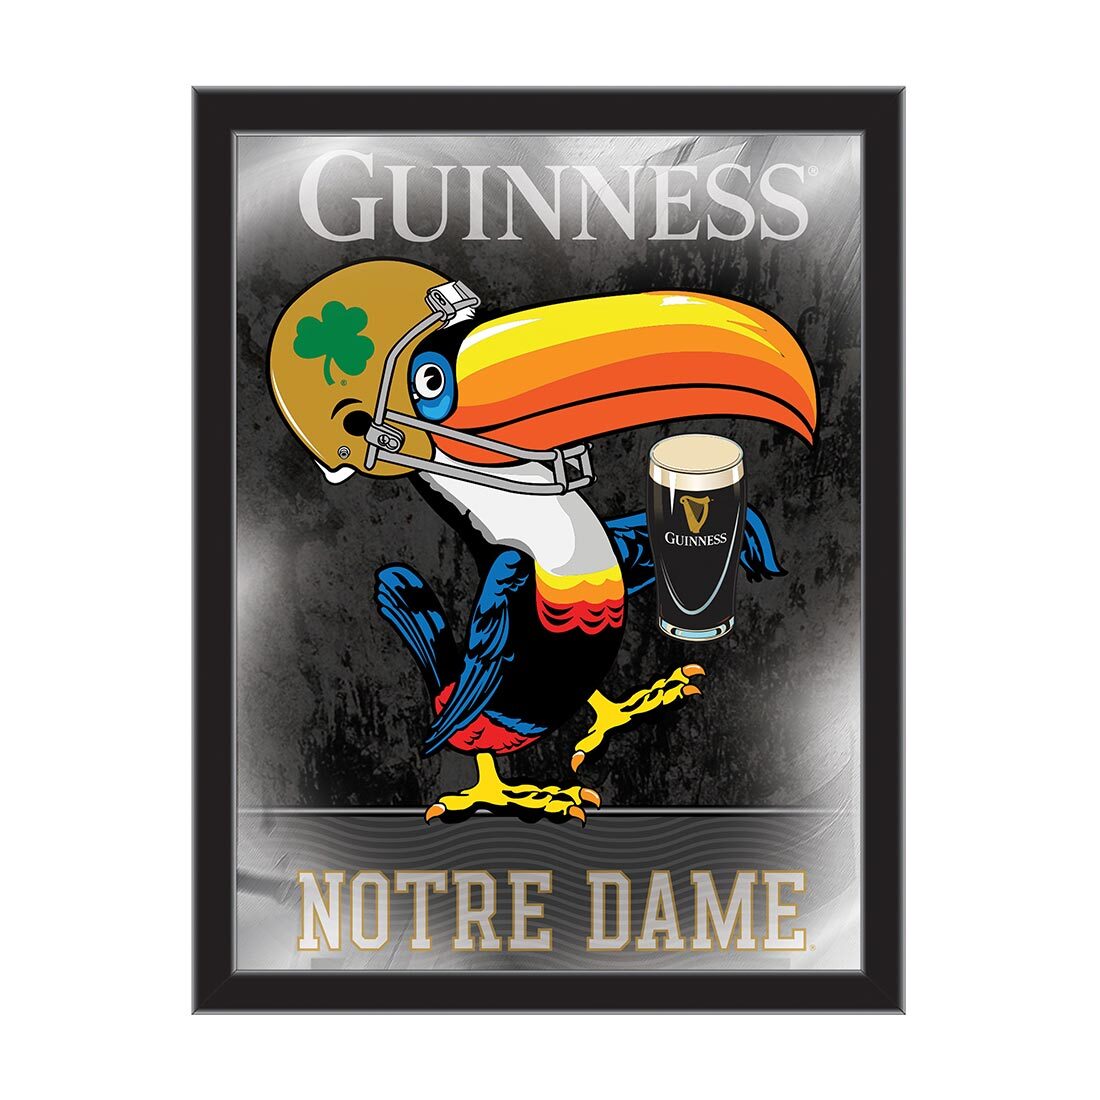 Guinness Notre Dame Toucan Wall Mirror - 26"x15"